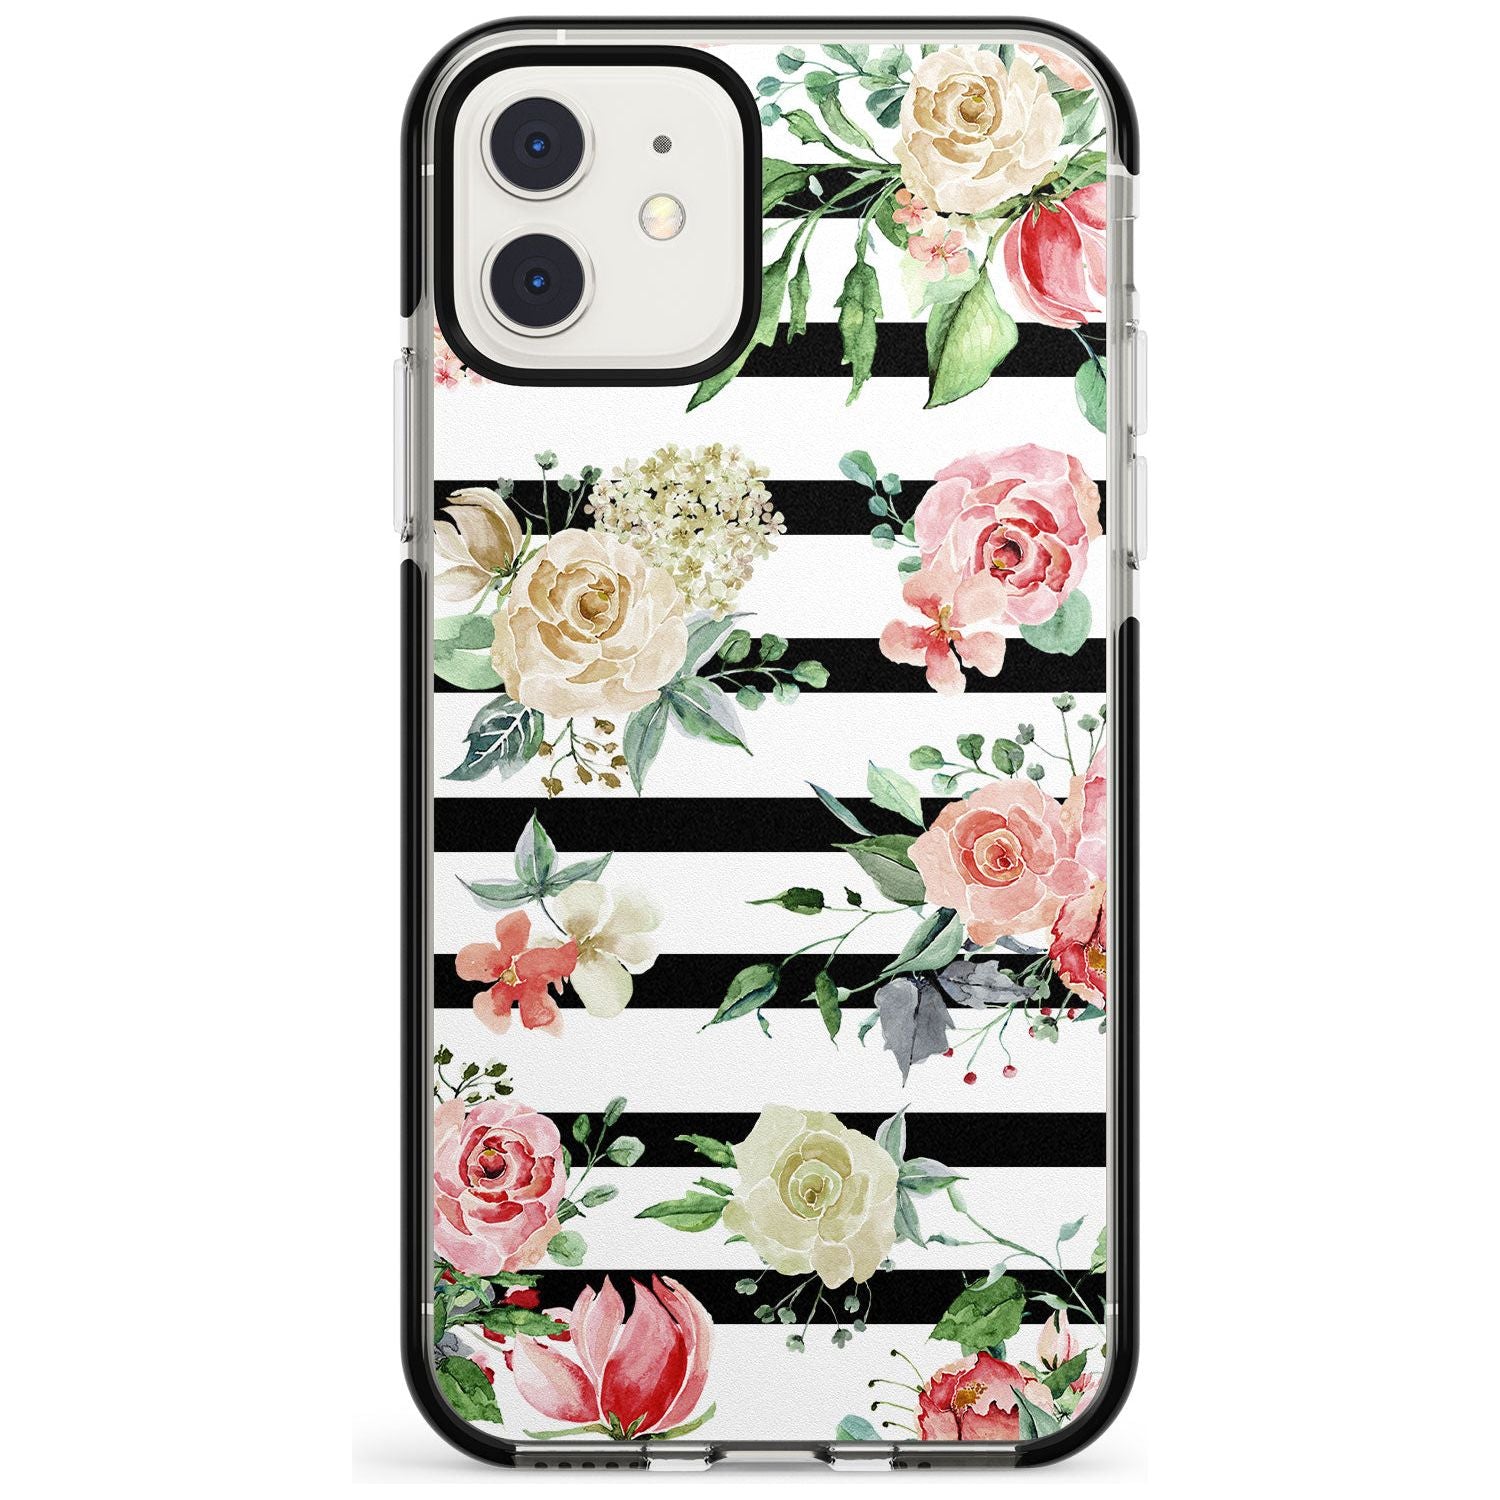 Bold Stripes & Flower Pattern Black Impact Phone Case for iPhone 11